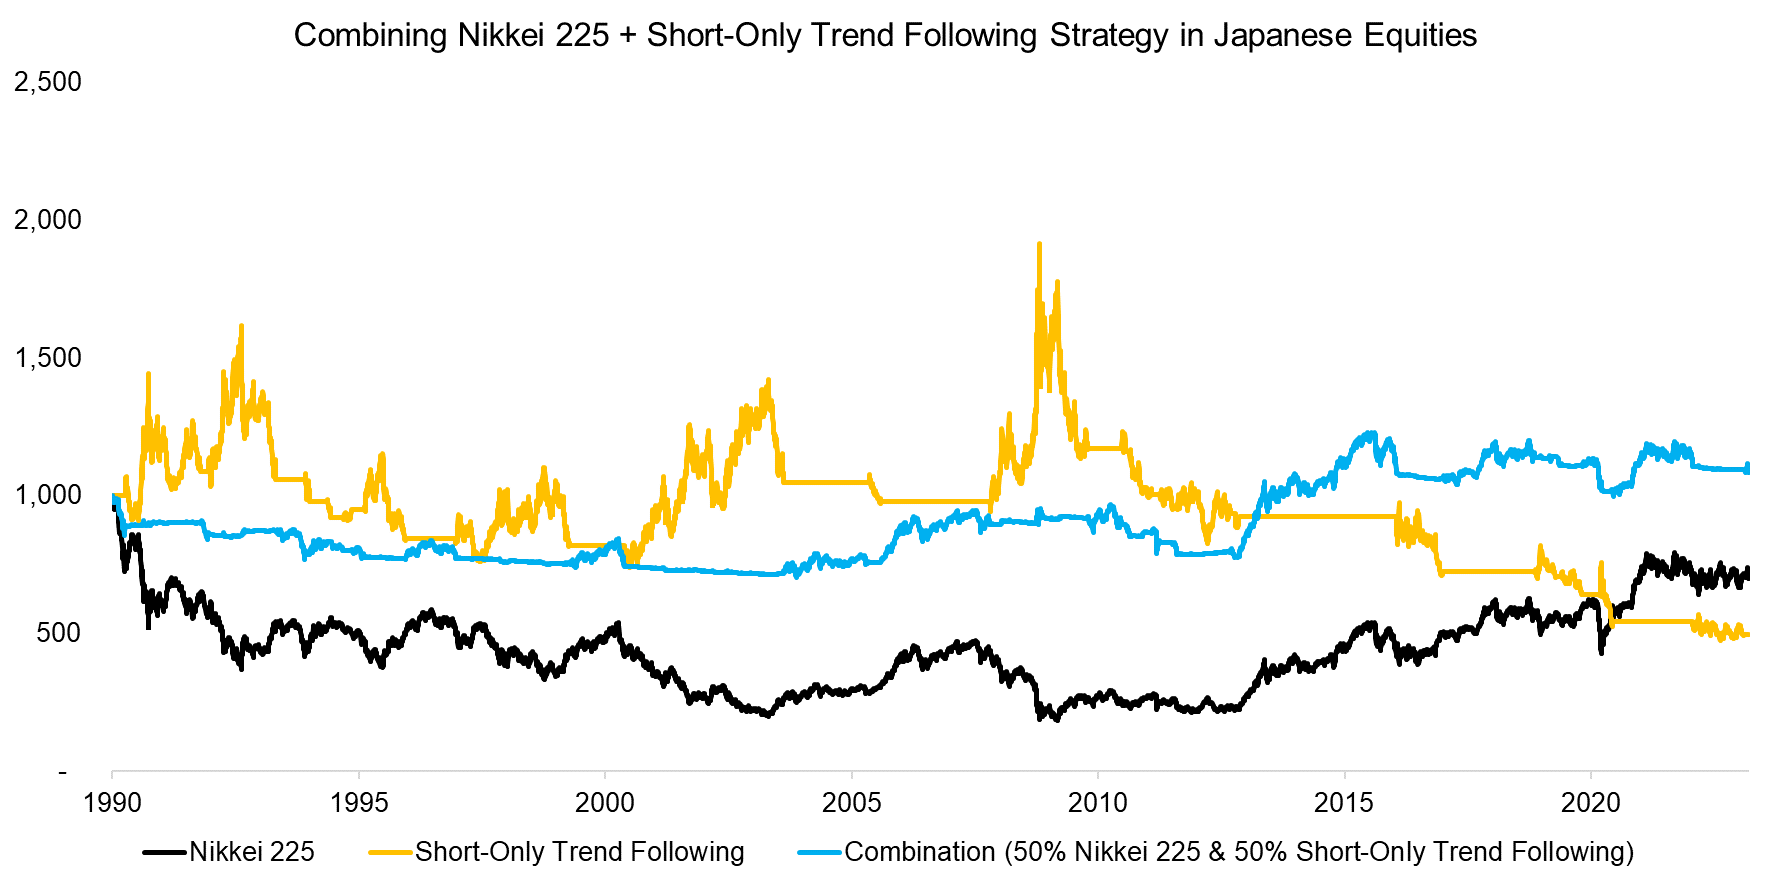 Combining Nikkei 225 + Short-Only Trend Following Strategy in Japanese Eq